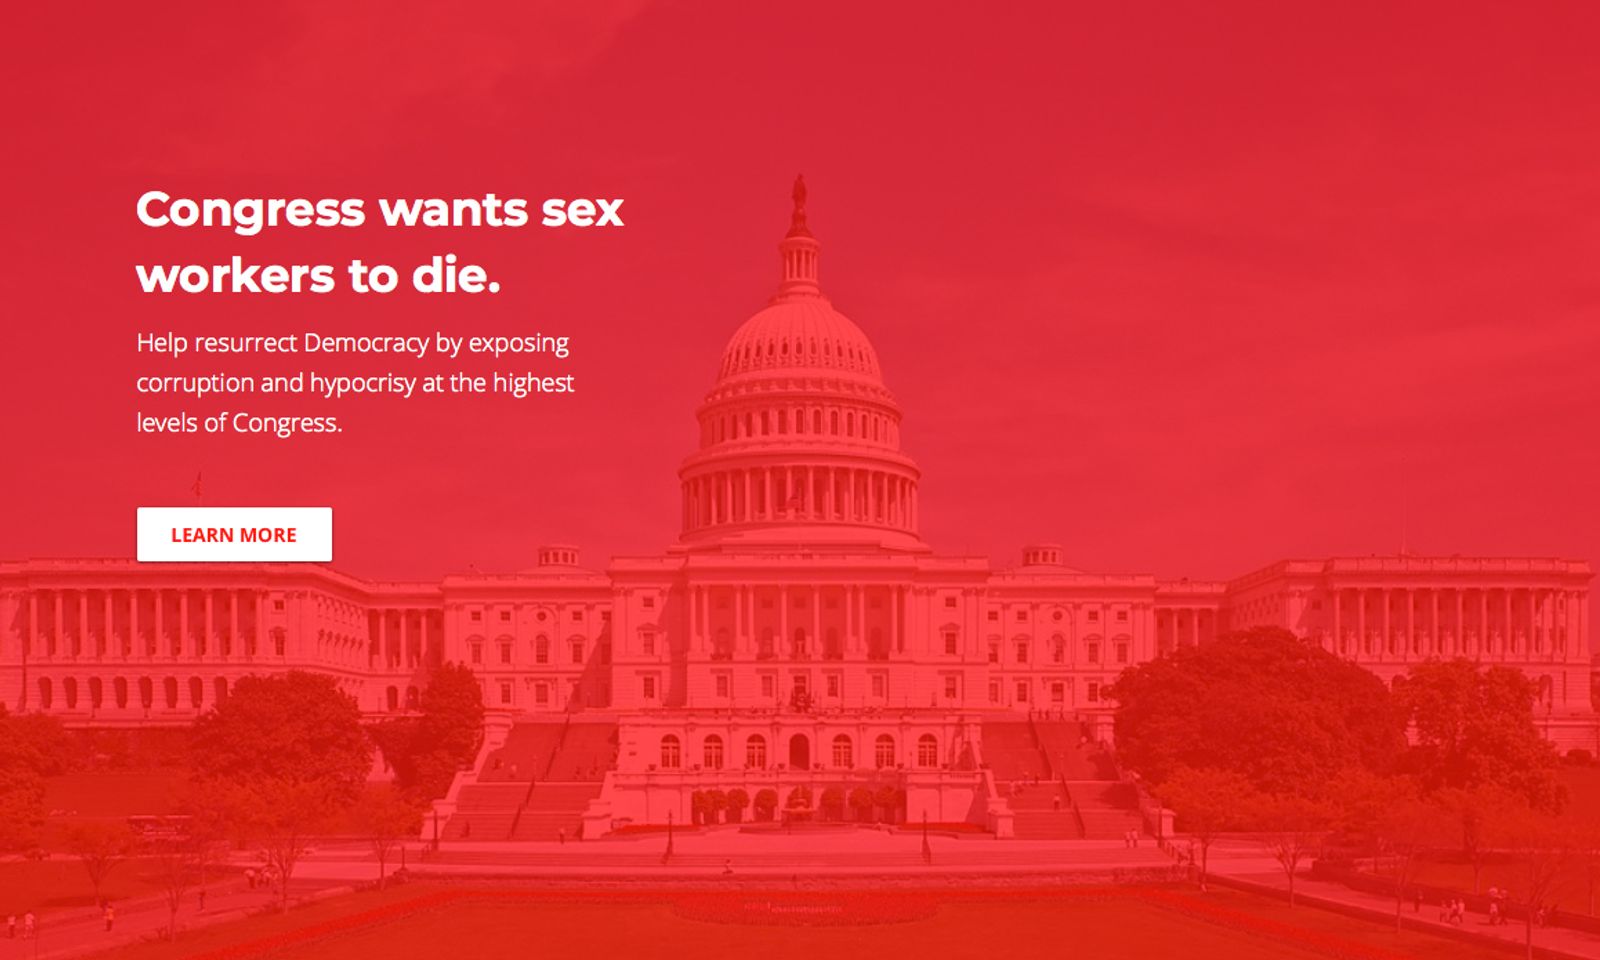 SpankChain Launches WTFOSTA Campaign to Out Sex Patron Pols